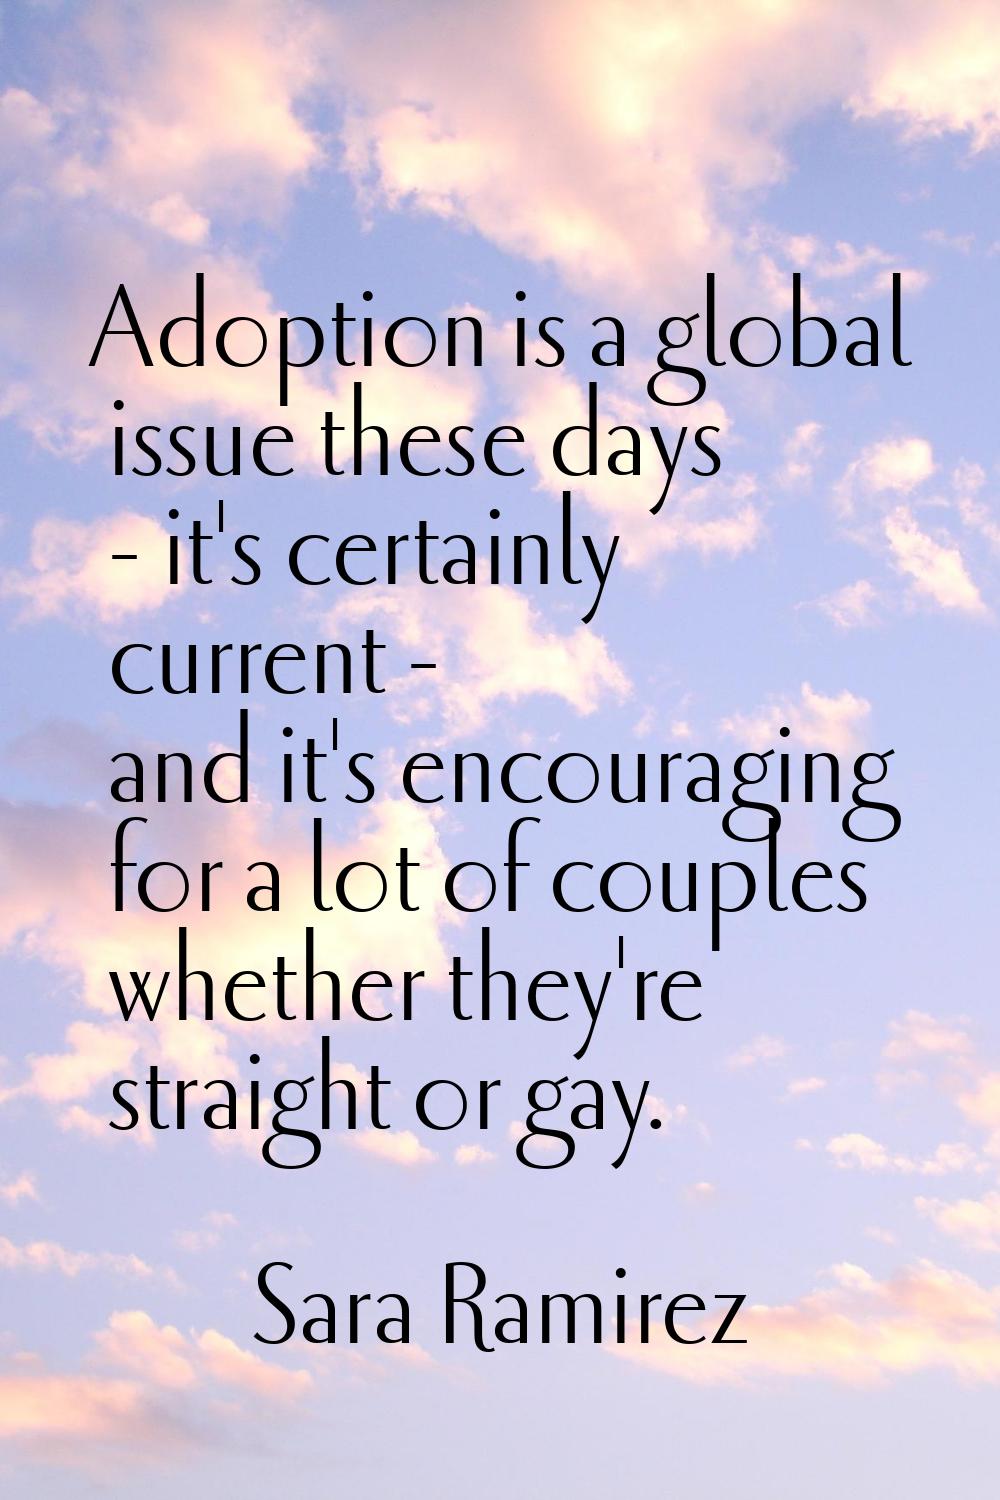 Adoption is a global issue these days - it's certainly current - and it's encouraging for a lot of 